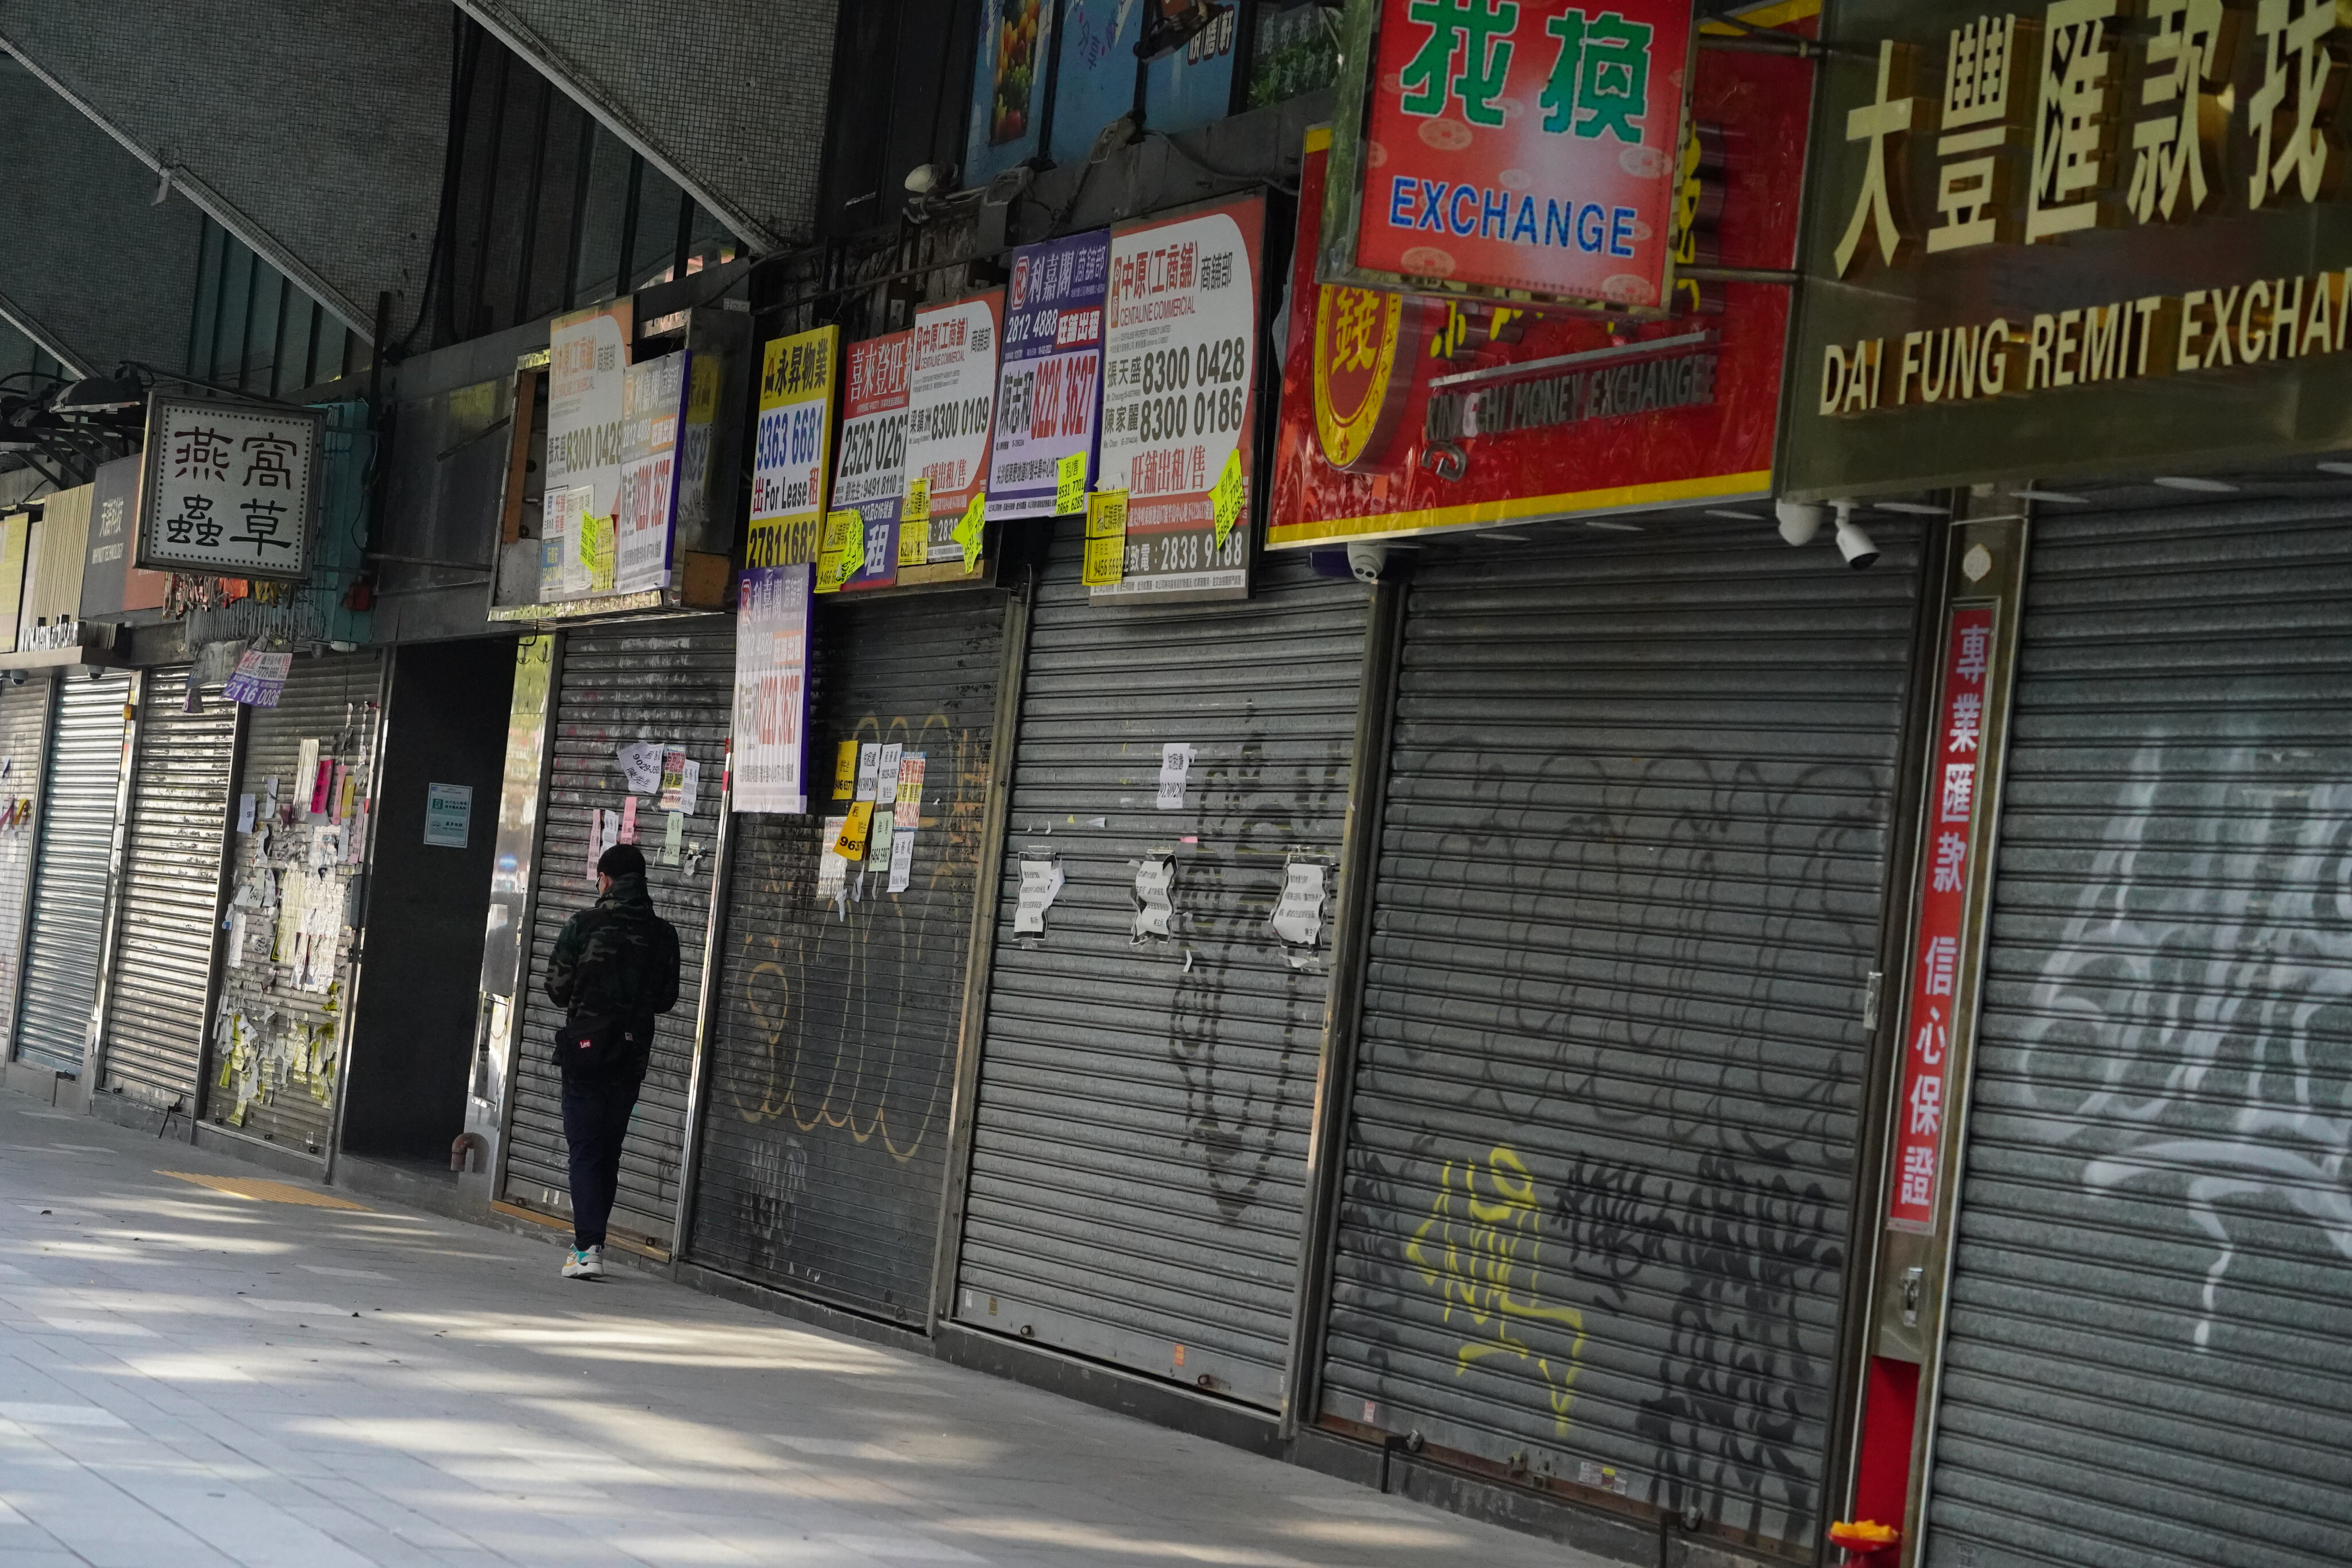 A controversial rent deferment scheme could be presented to the Legislative Council soon, after receiving the backing of the Executive Council. Photo: Felix Wong